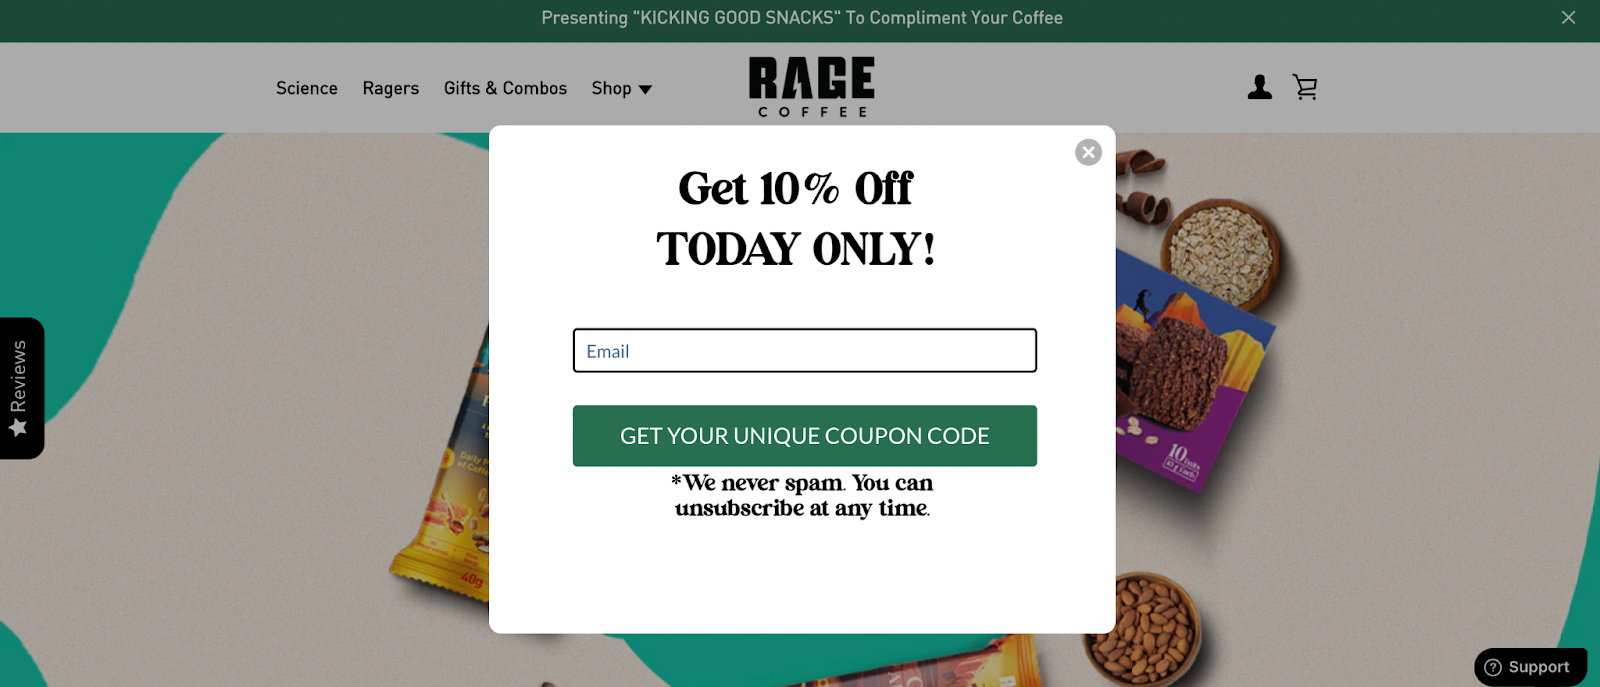 A limited-time discount coupon